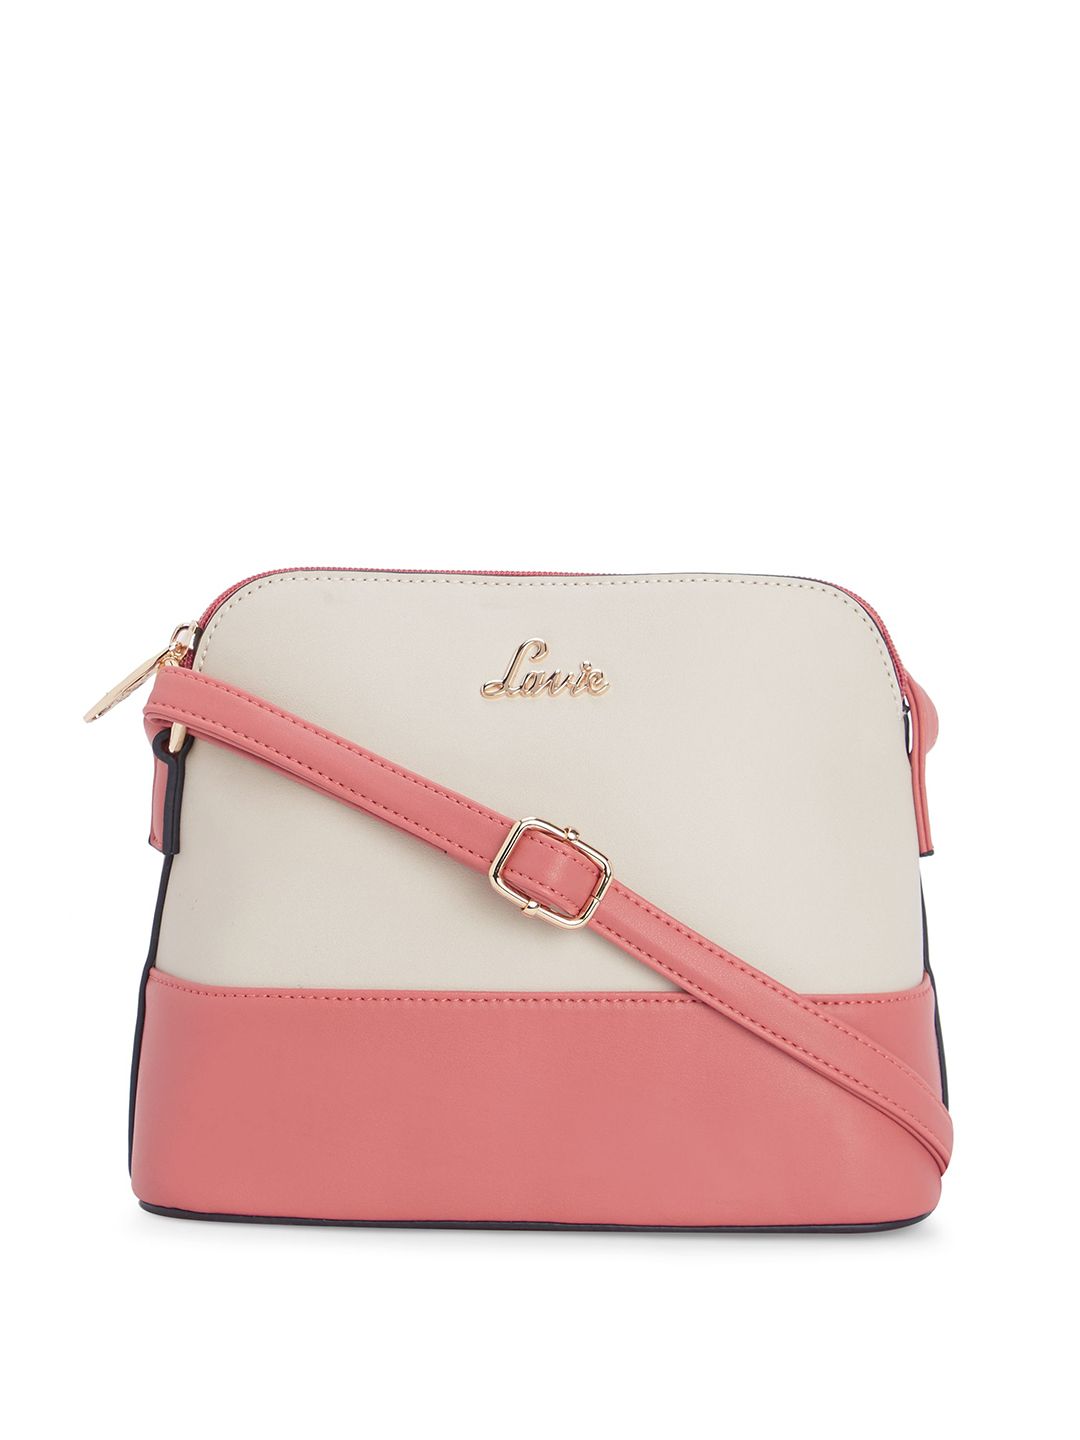 Lavie Off-White & Pink Colourblocked Sling Bag Price in India